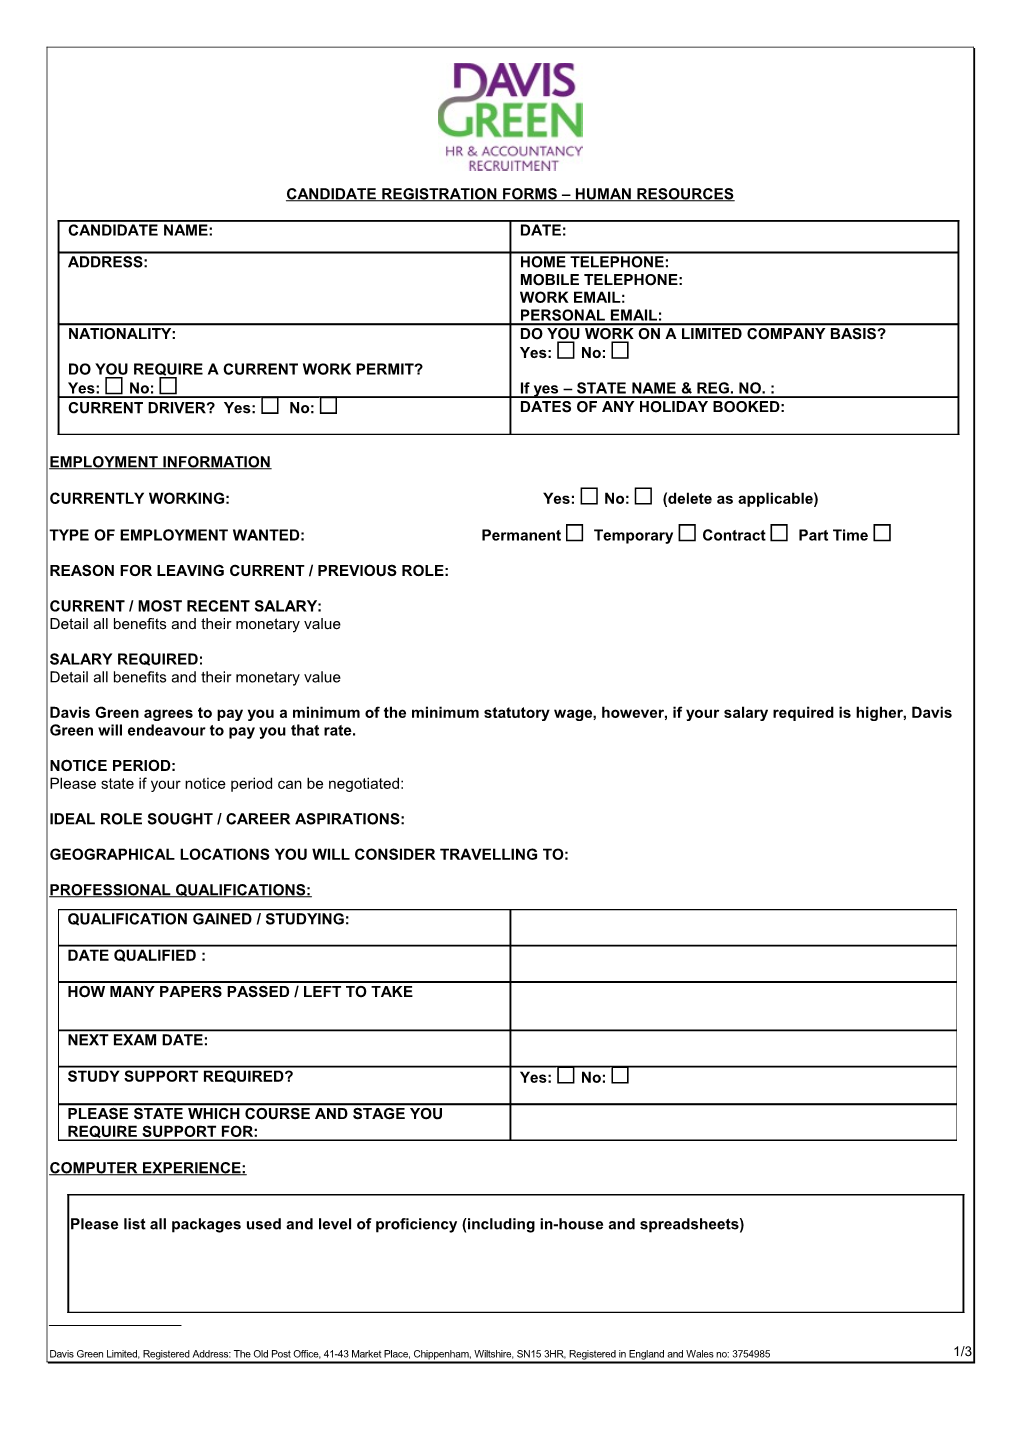 Candidate Registration Forms Human Resources